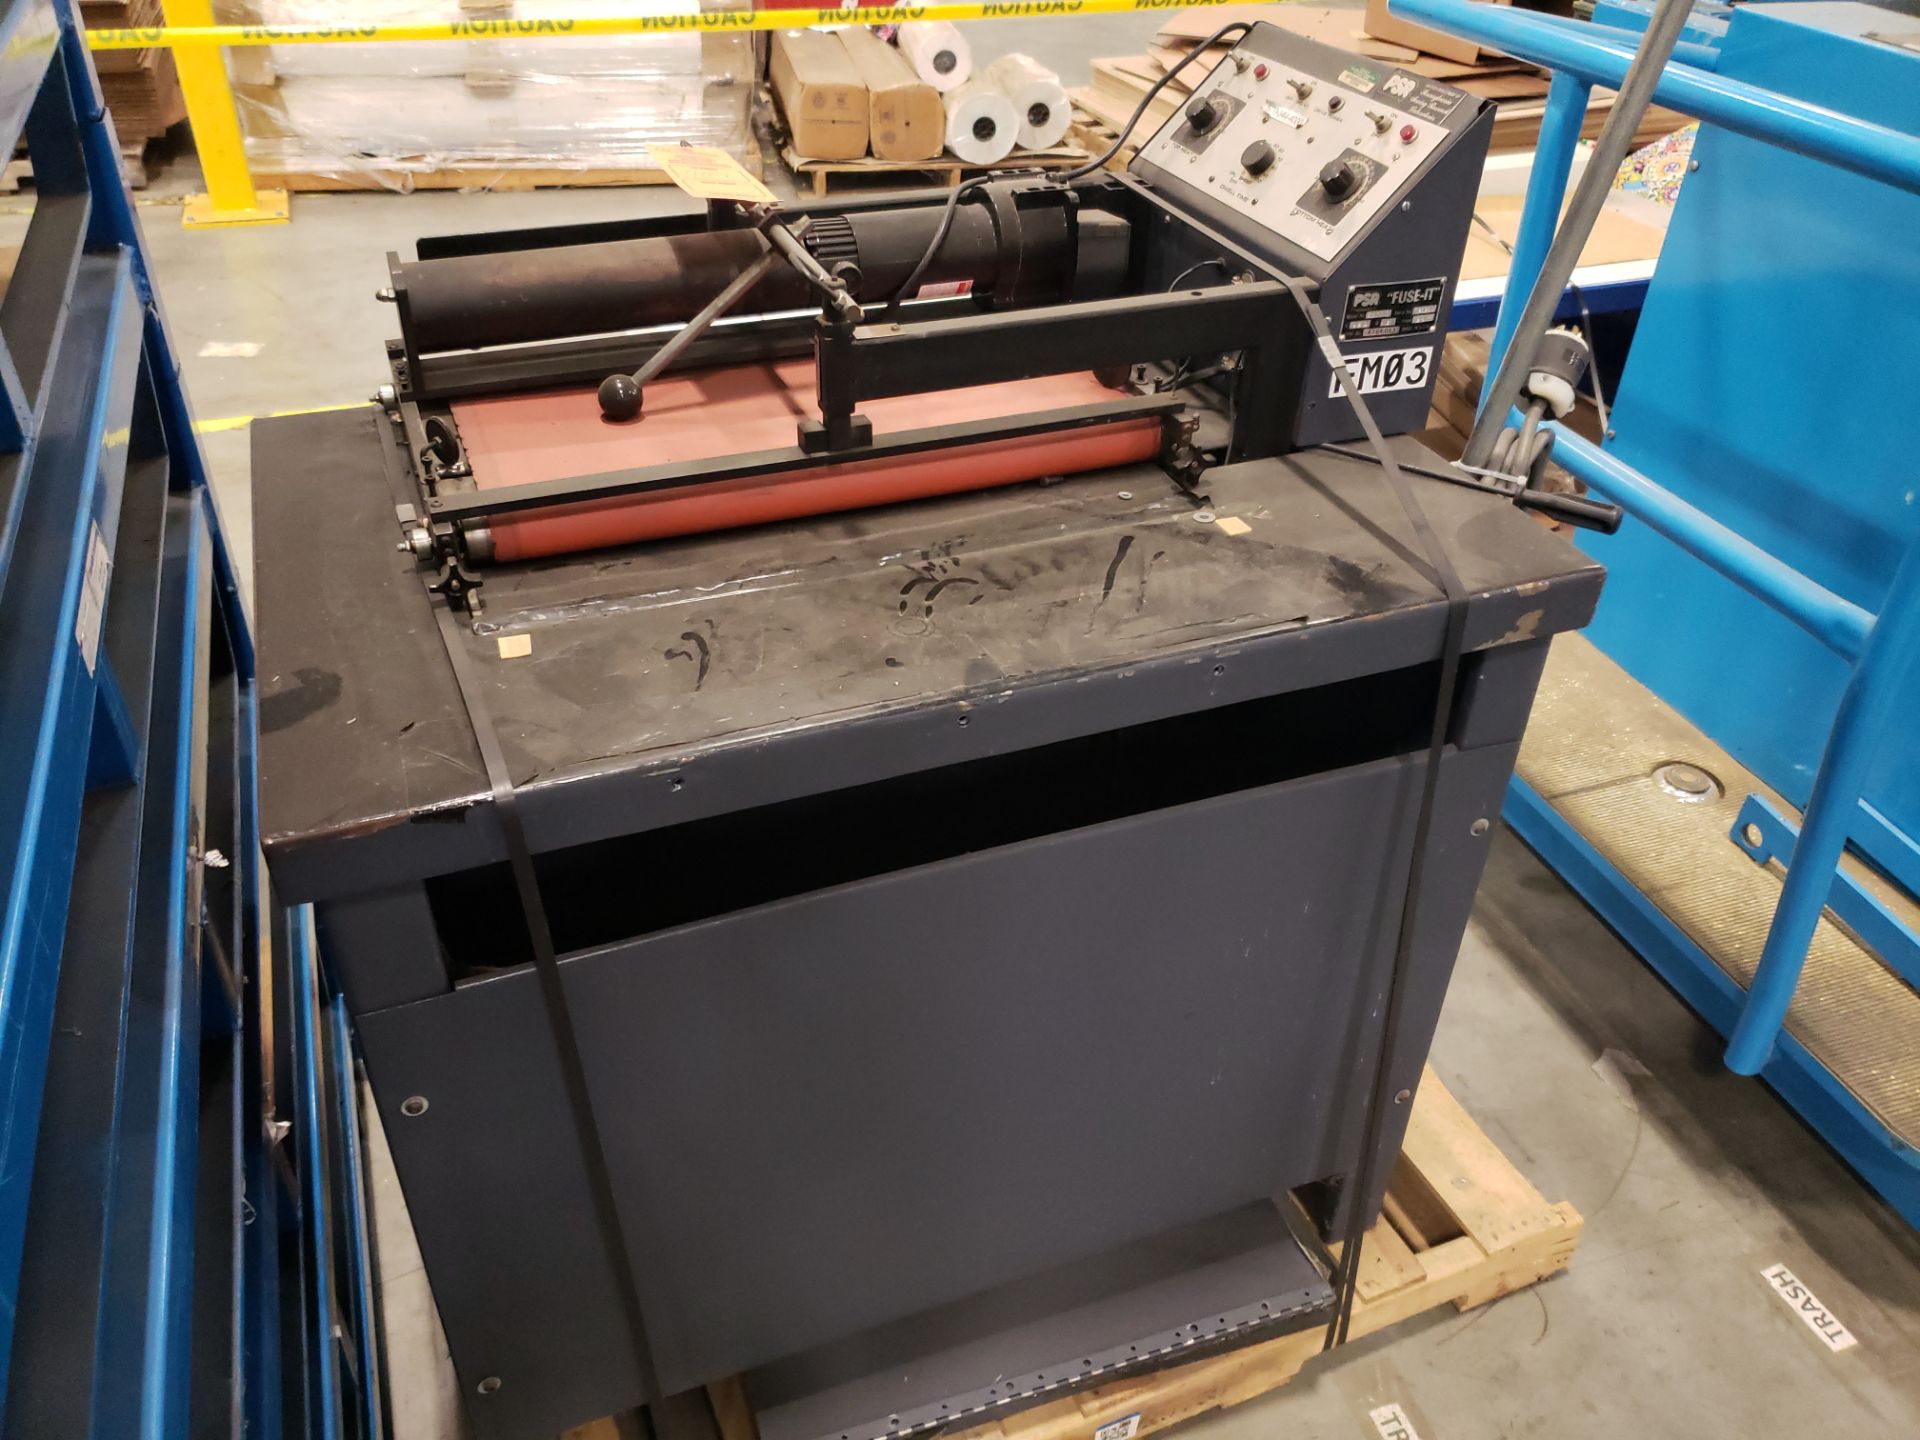 PSR FUSE IT HEAT TABLE CONVEYOR MODEL-24000 S#121901 (LOCATED AT: 433 COUNCIL DRIVE, FORT WAYNE,